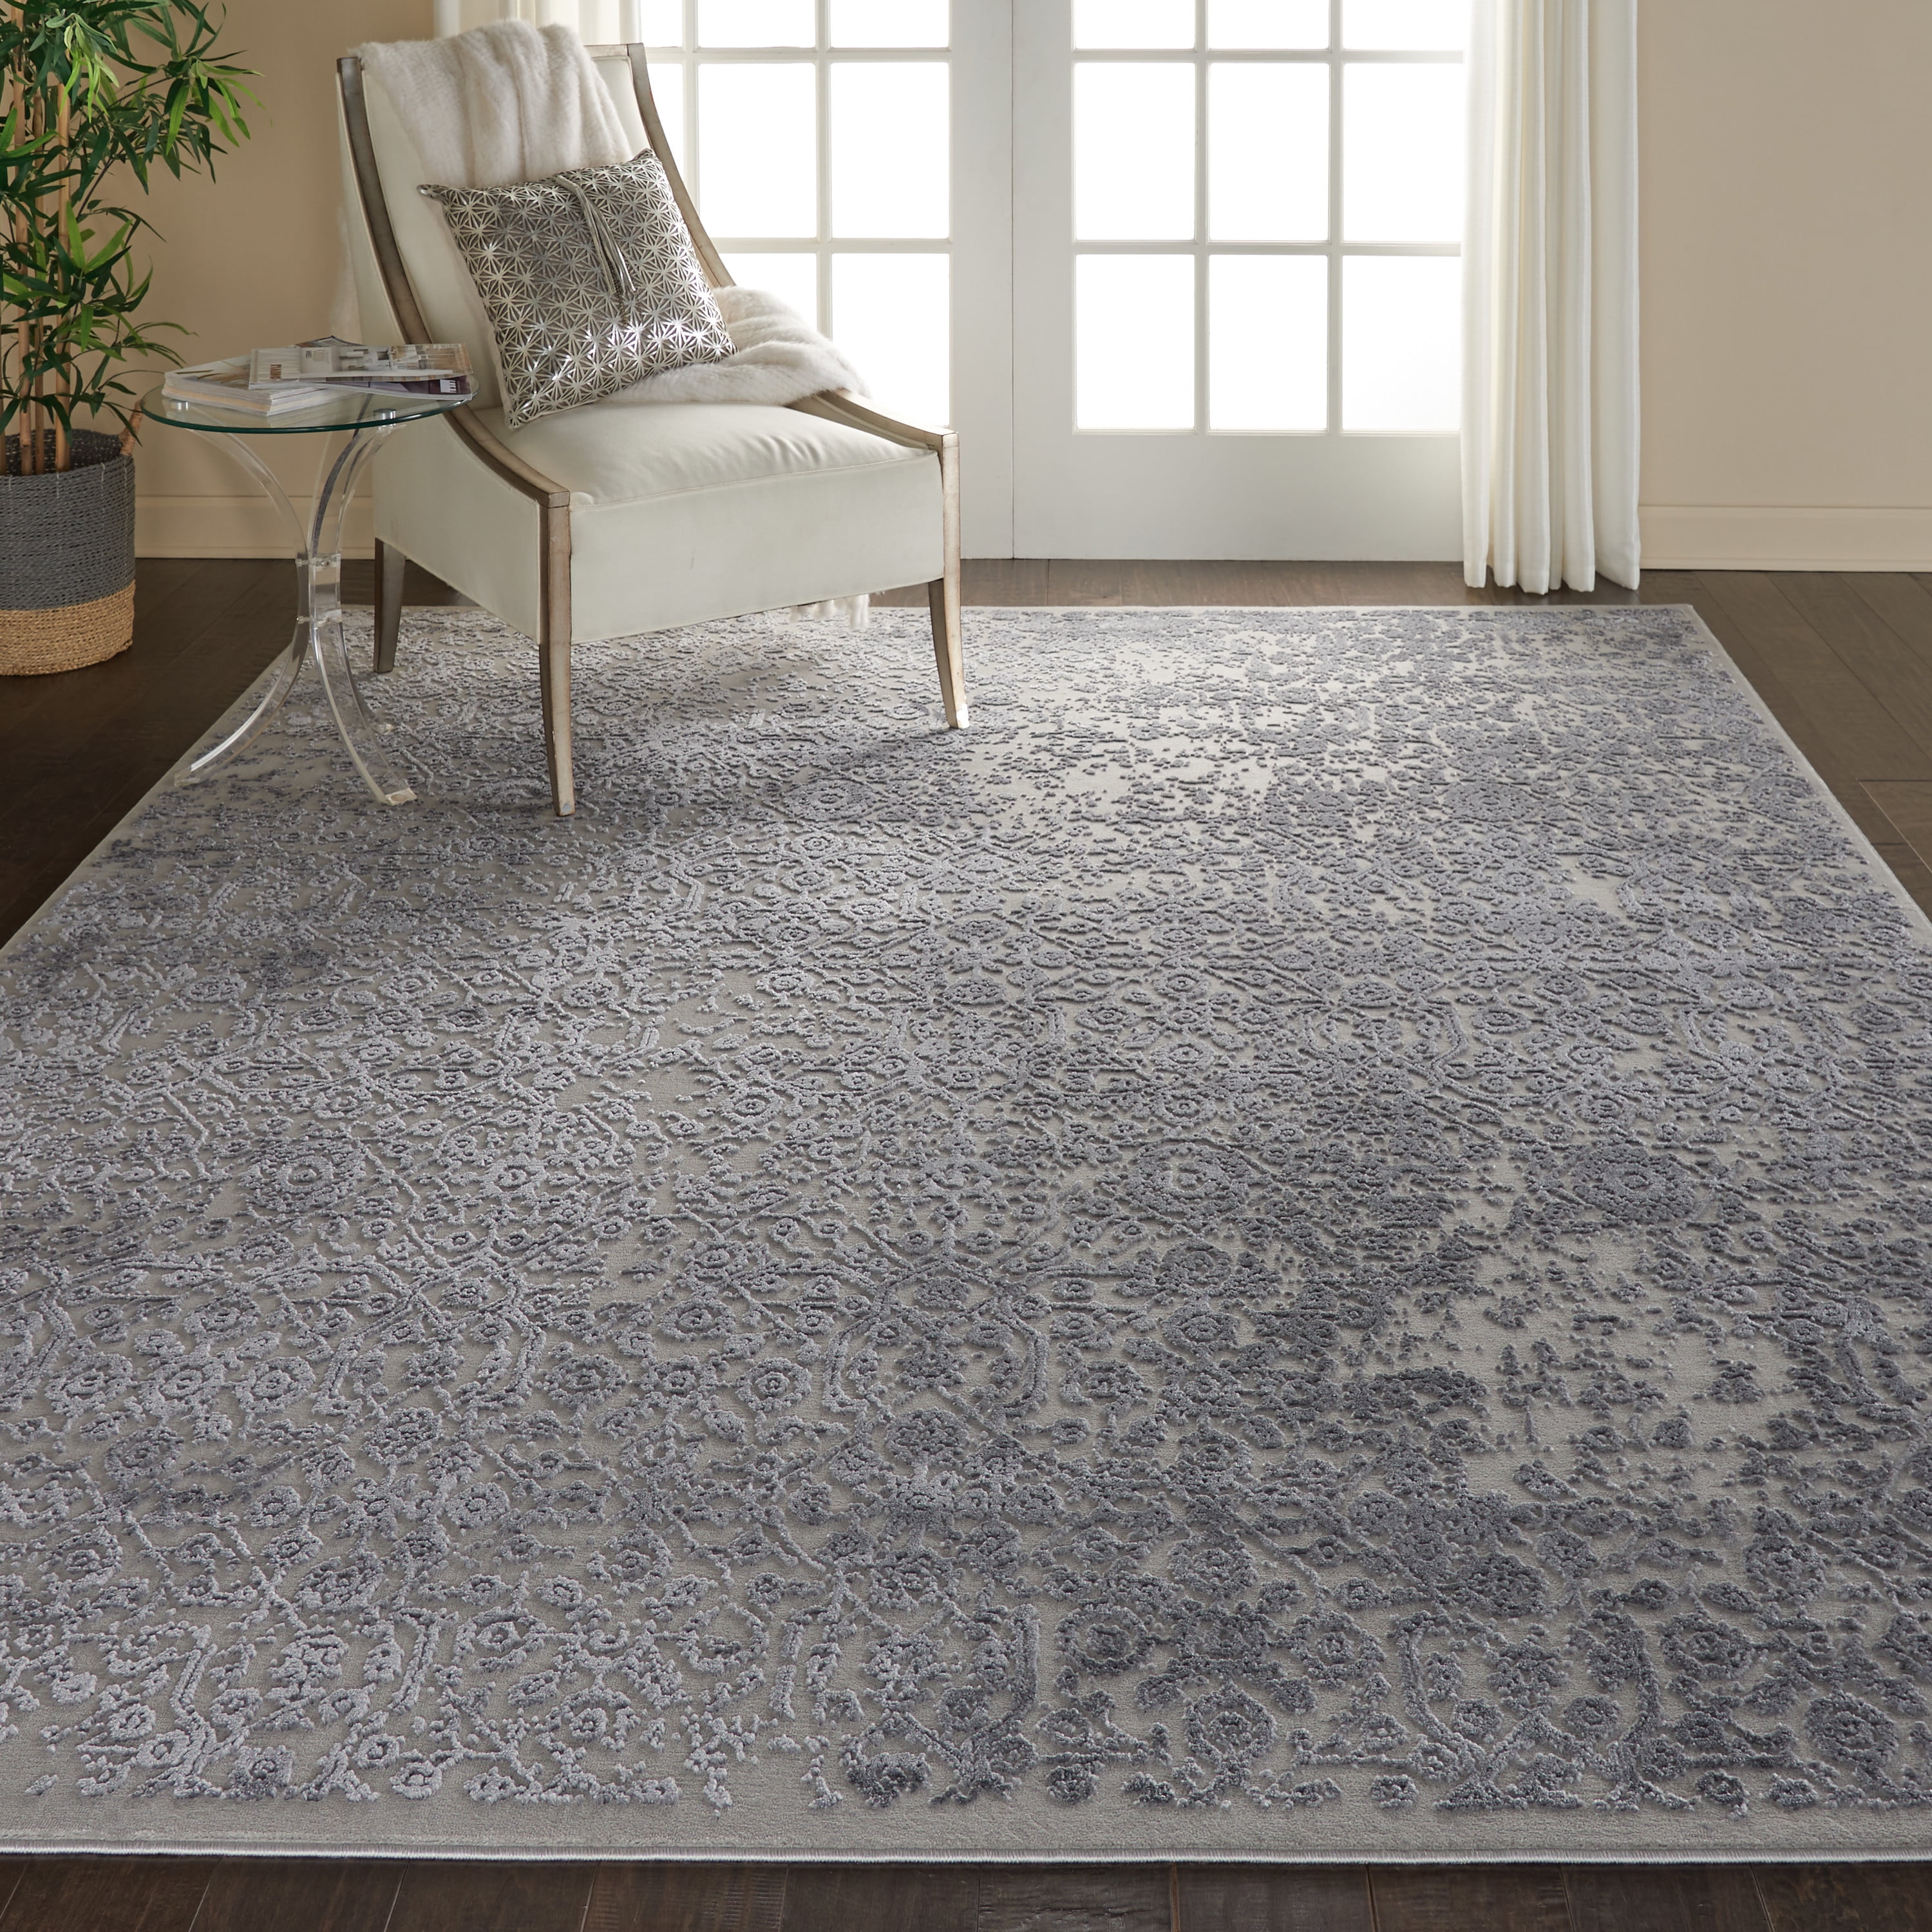 Slate Blue And Grey French Country, Country French Rugs